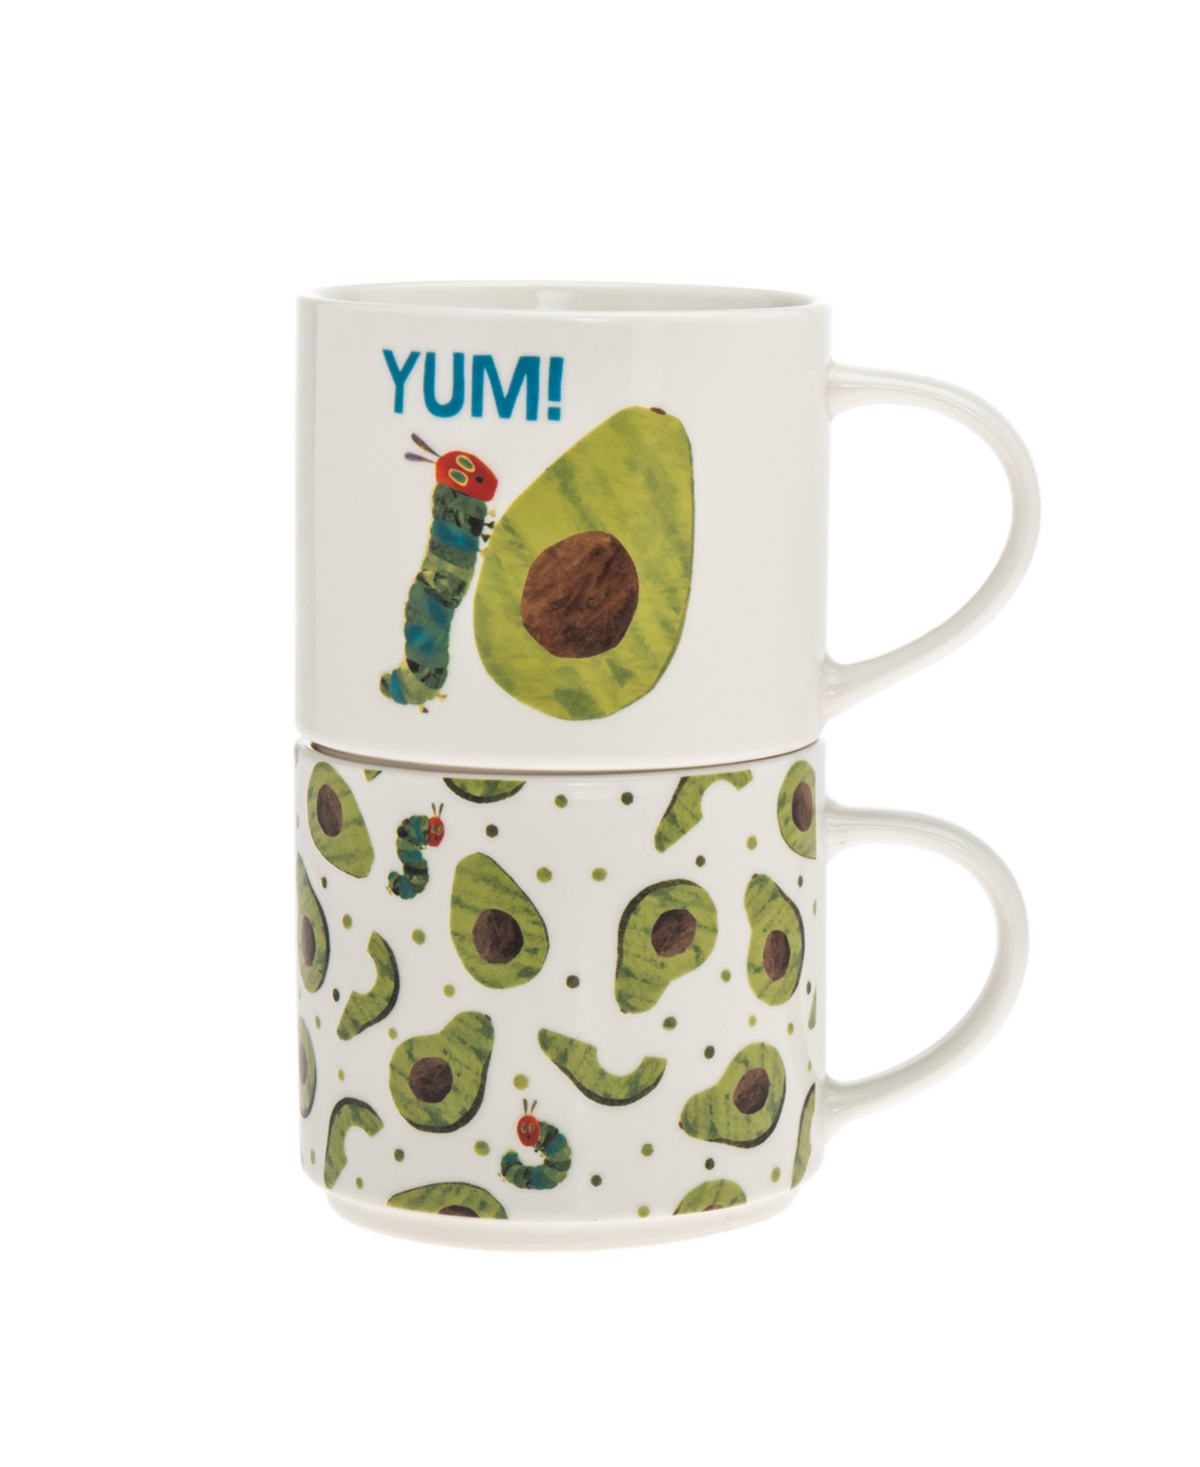 Godinger The World Of Eric Carle, The Very Hungry Caterpillar Berry Stack Mug, Set of 2